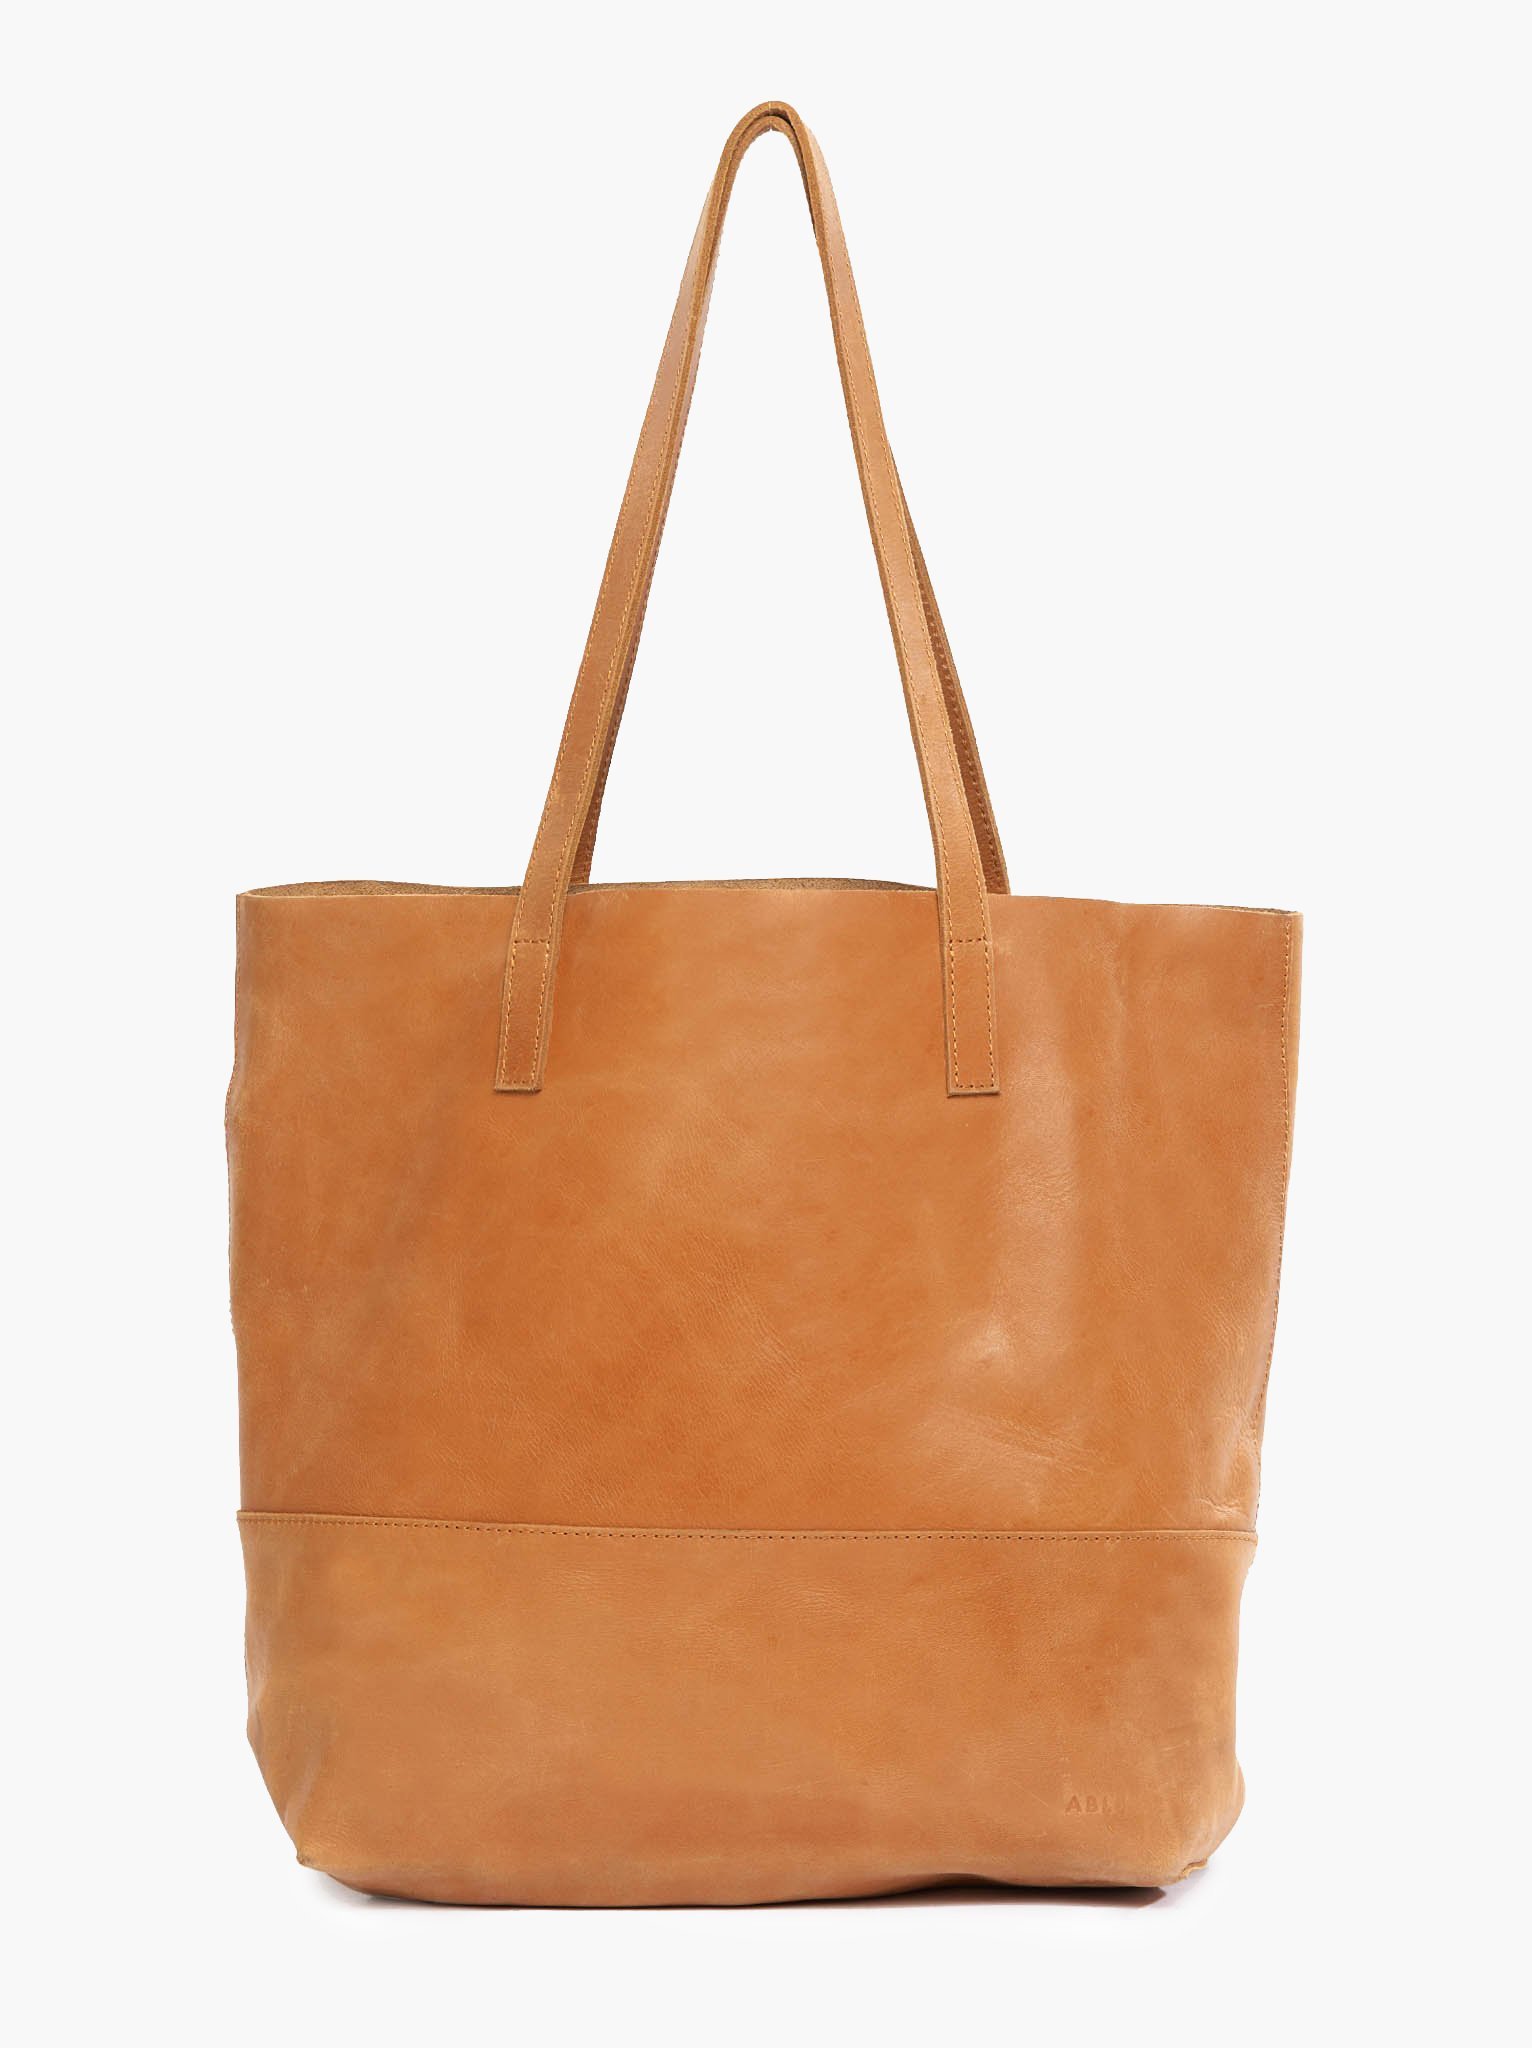 Simple leather tote from ABLE Global + Local